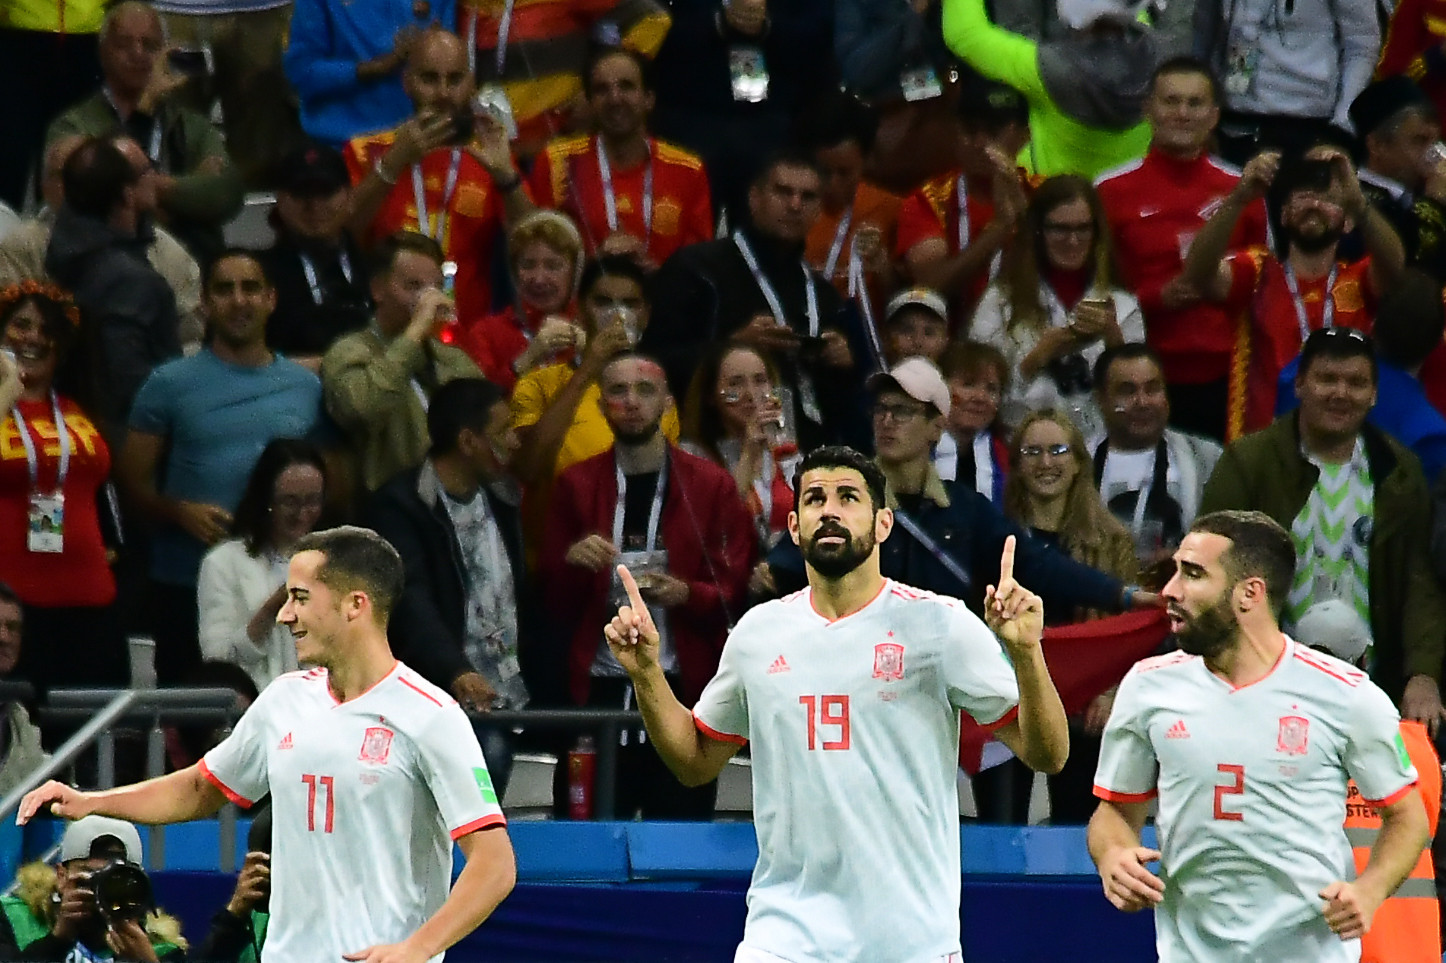 Diego Costa scored the only goal of the game for Spain versus Iran ©Getty Images